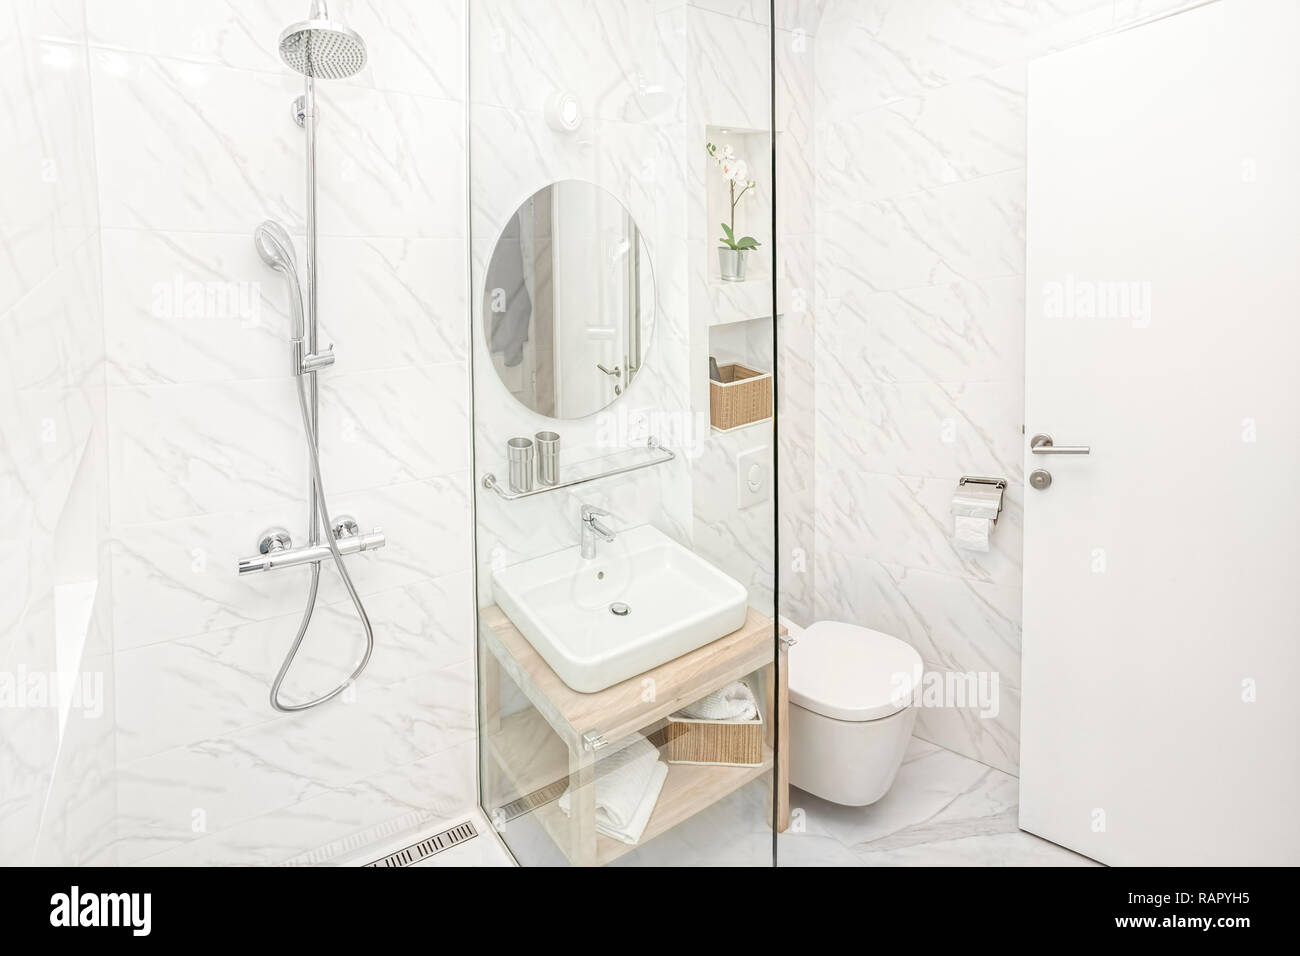 Bright new bathroom interior with glass walk in shower with marble tile surround Stock Photo